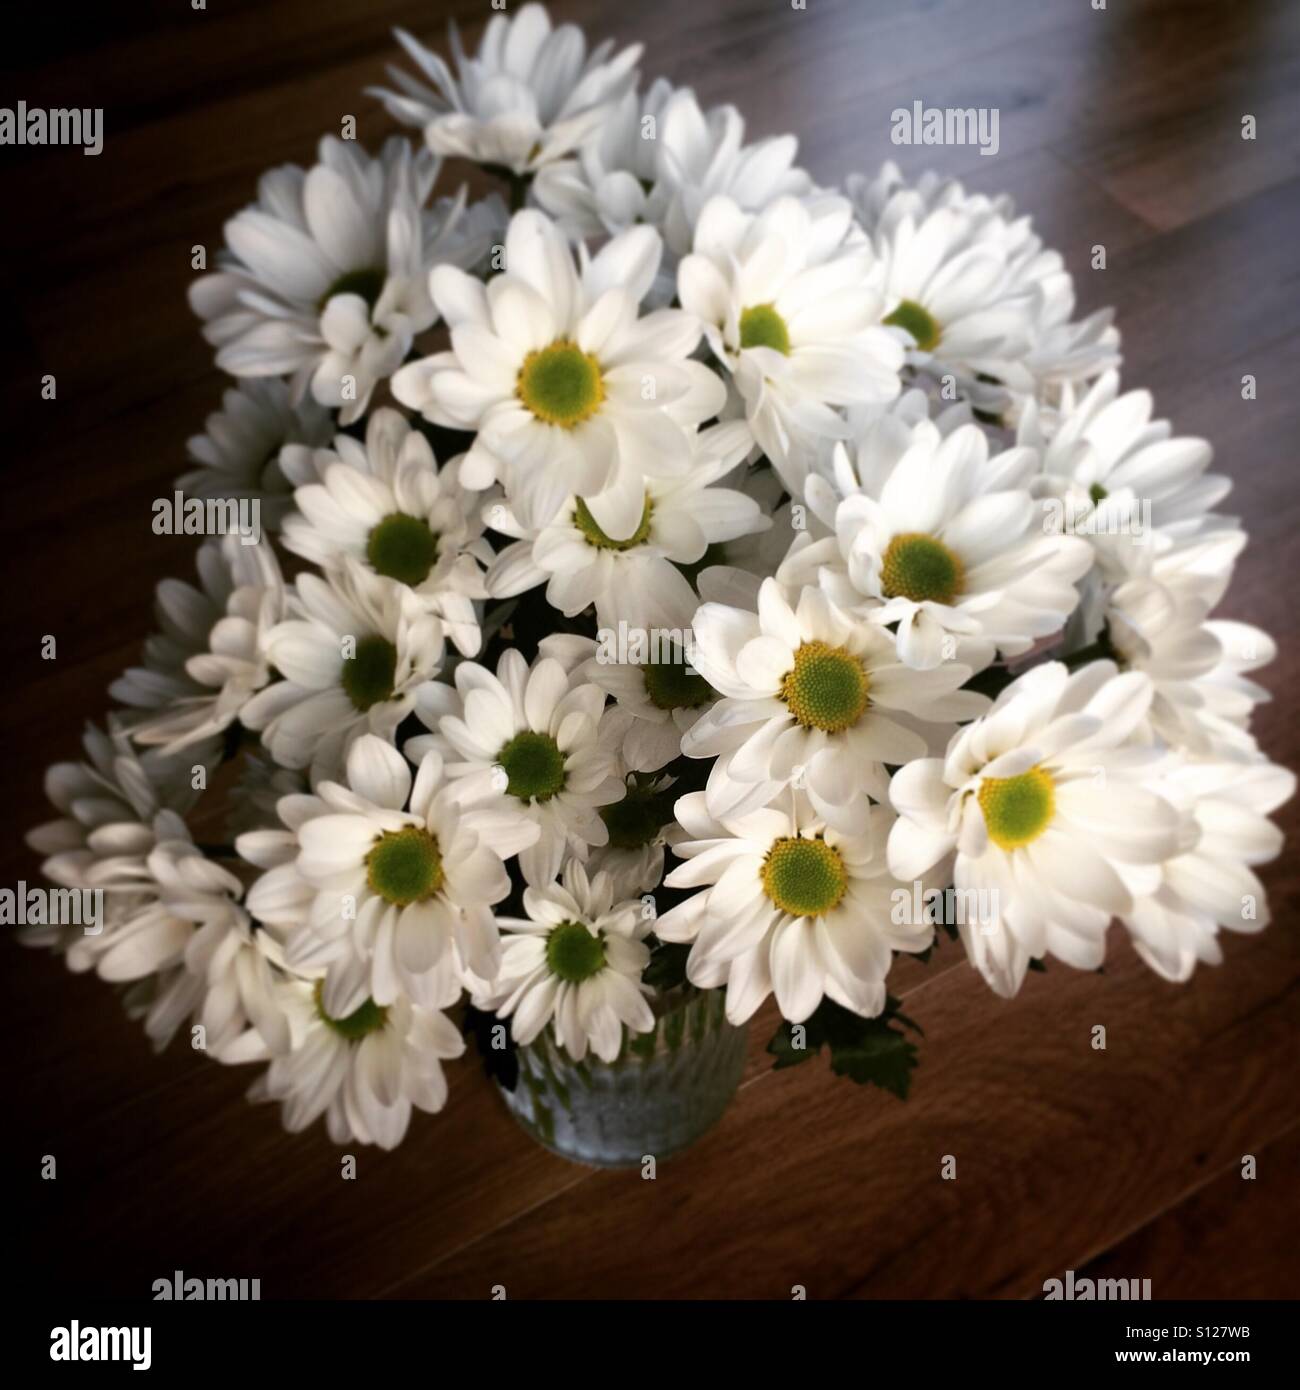 Large white daisy's in a vase Stock Photo